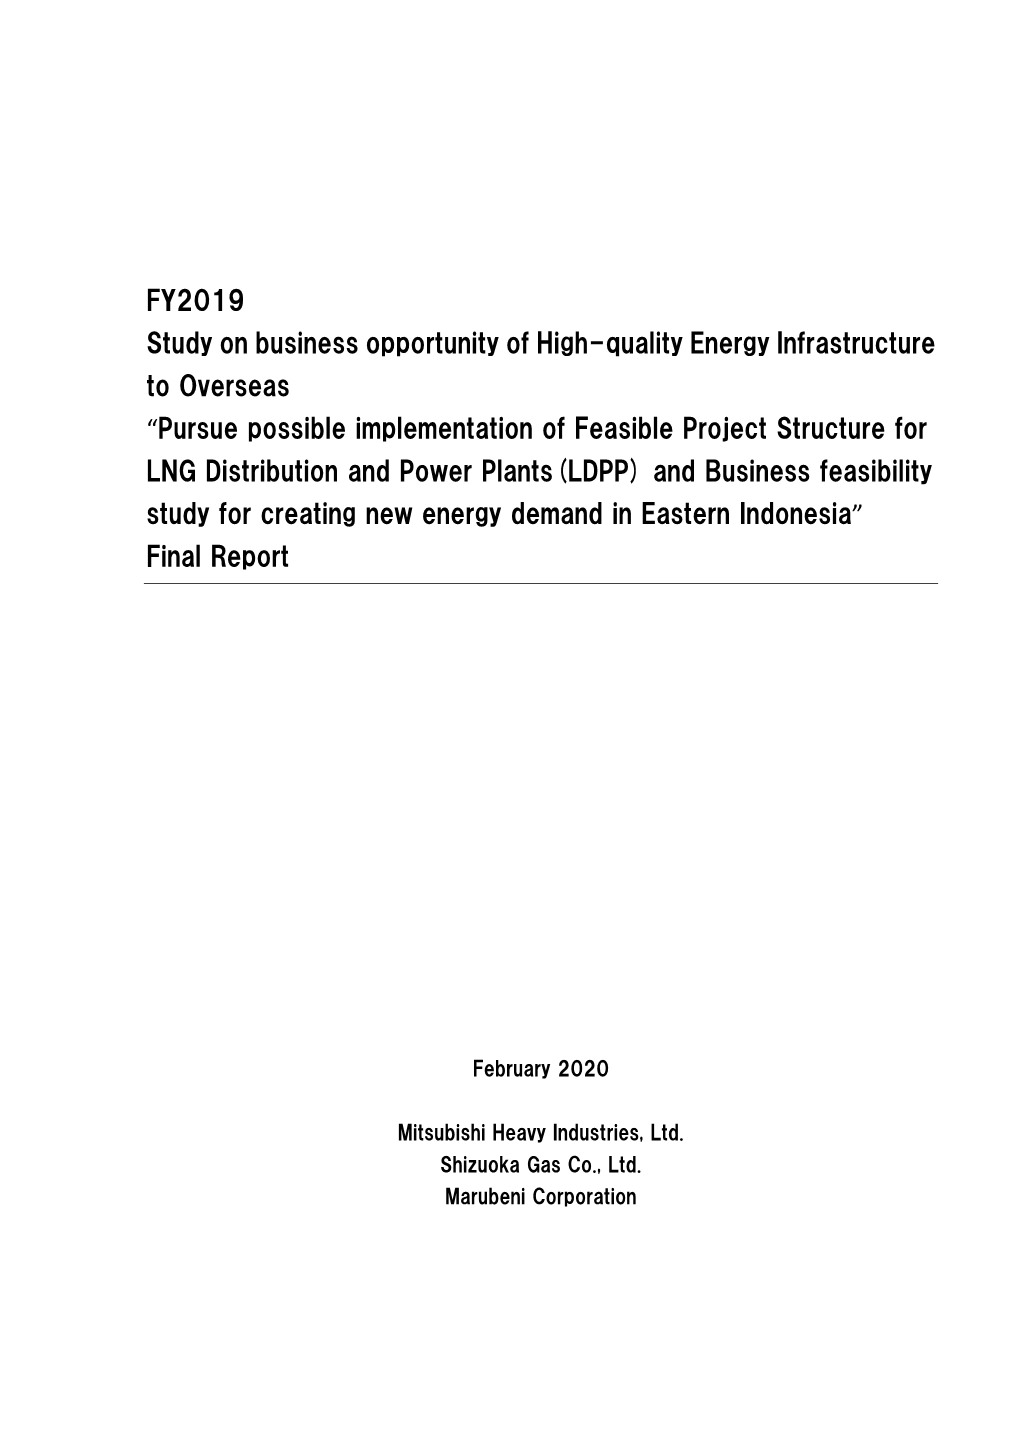 FY2019 Study on Business Opportunity of High-Quality Energy